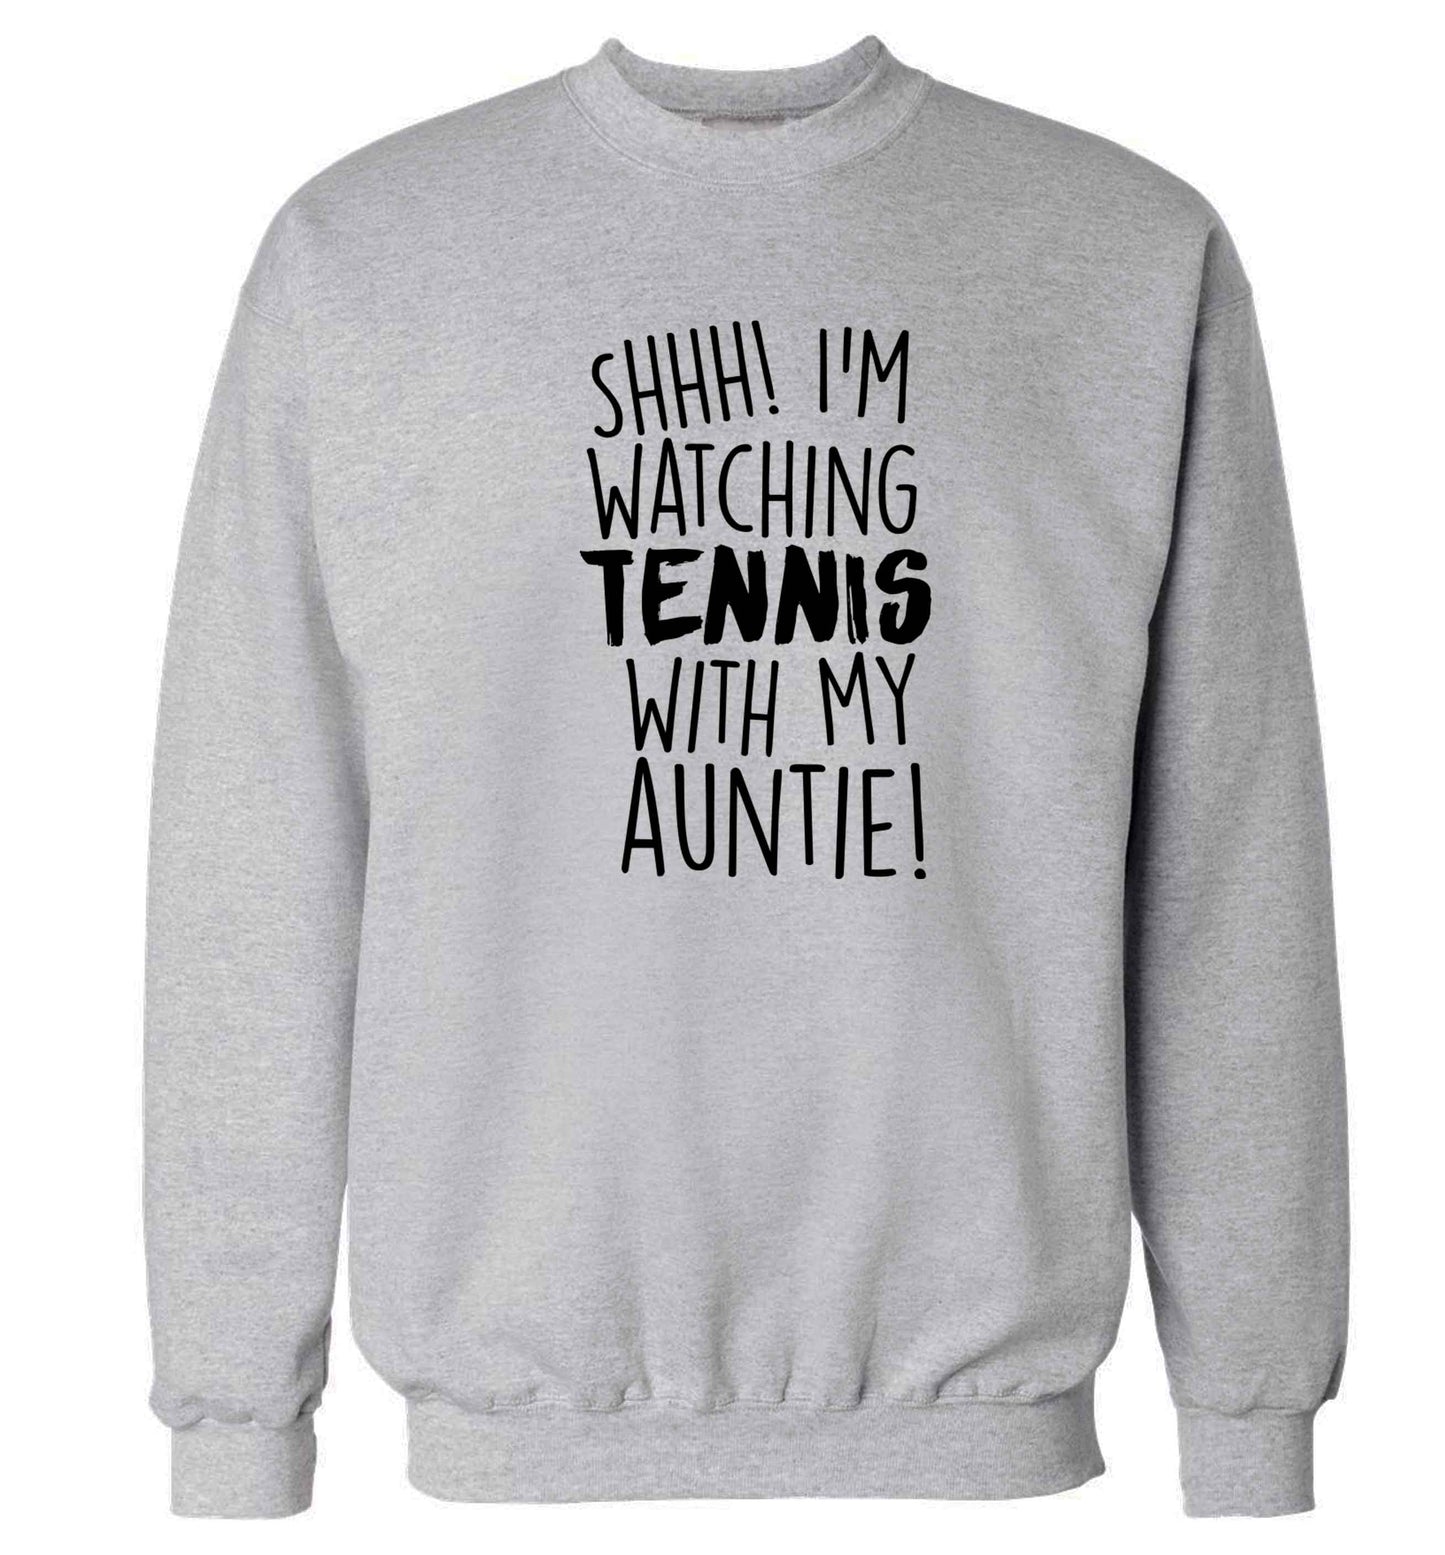 Shh! I'm watching tennis with my auntie! Adult's unisex grey Sweater 2XL